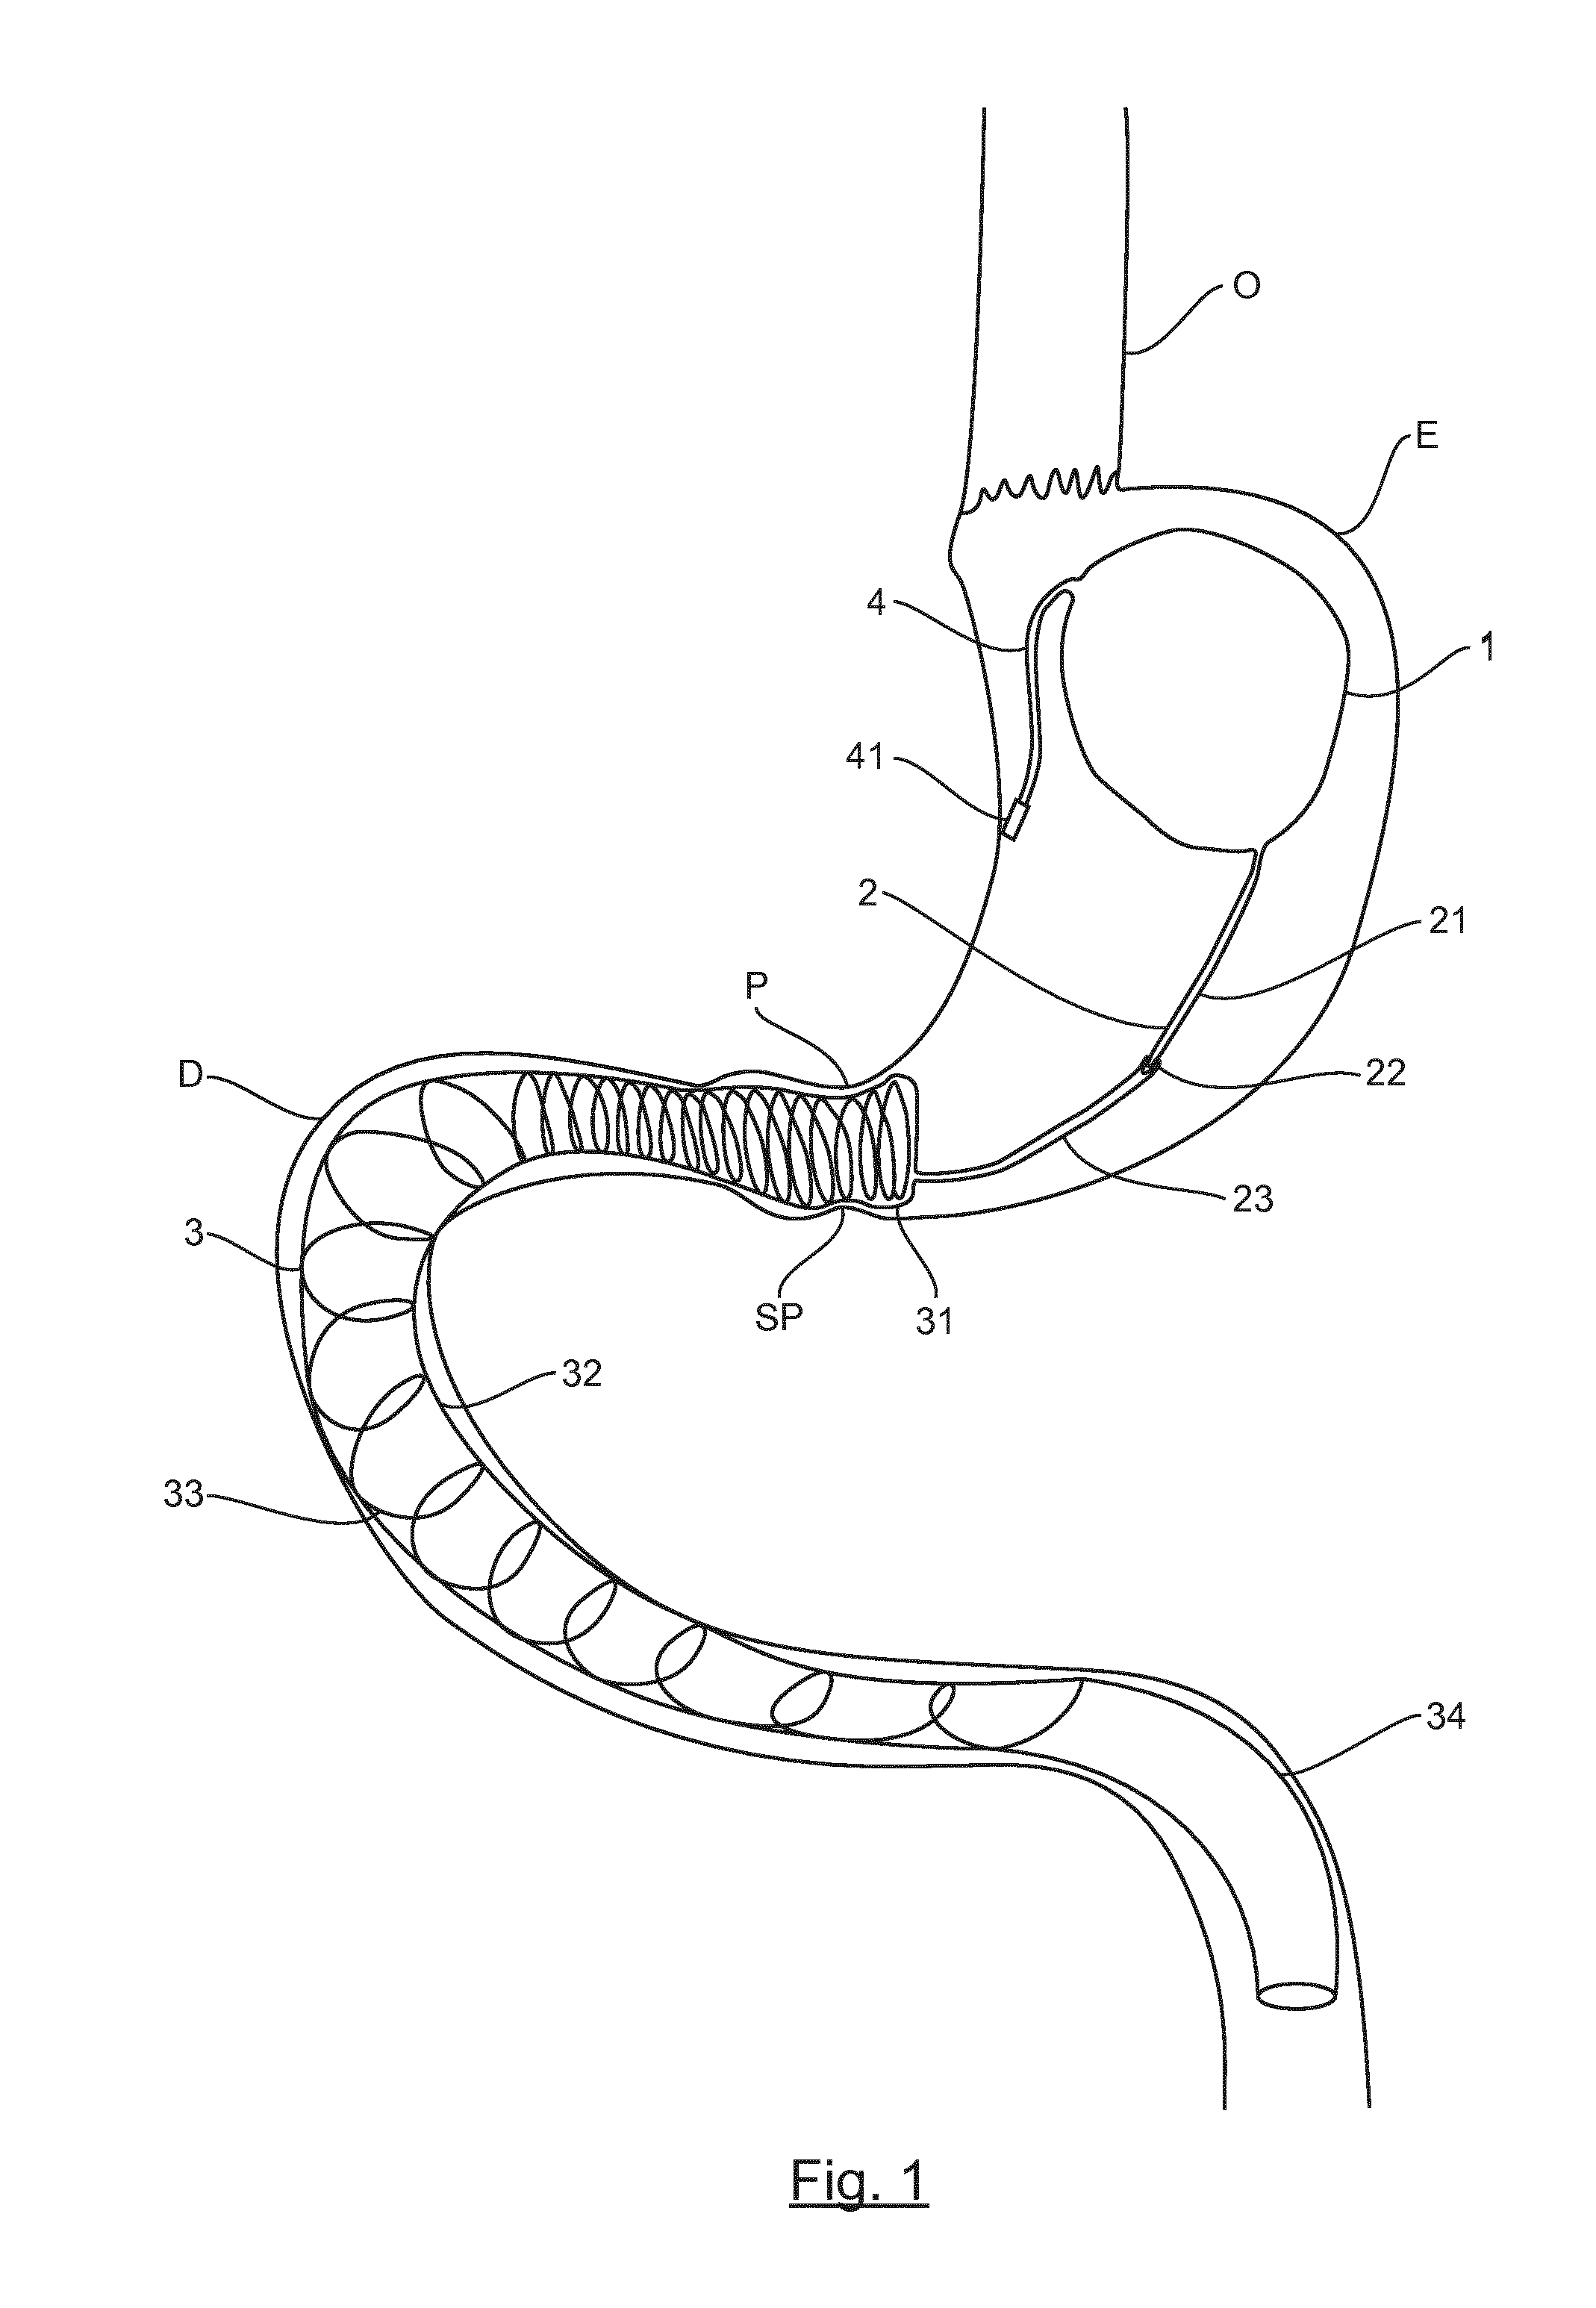 Implantable prosthetic device for weight loss in an obese or overweight patient comprising an inflatable gastric balloon and a duodenal prosthesis